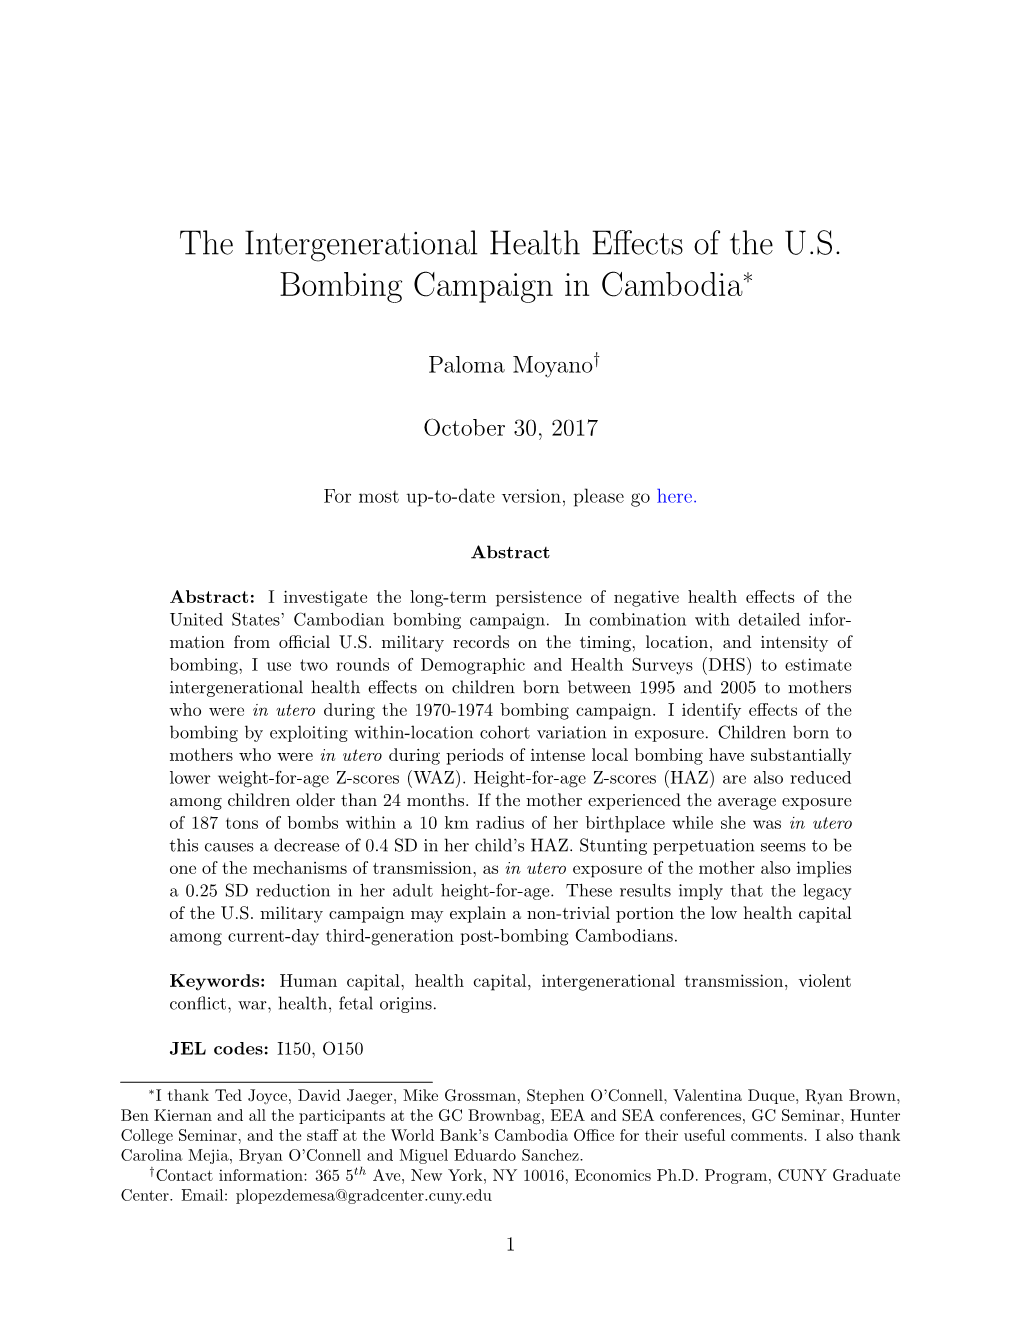 The Intergenerational Health Effects of the U.S. Bombing Campaign In